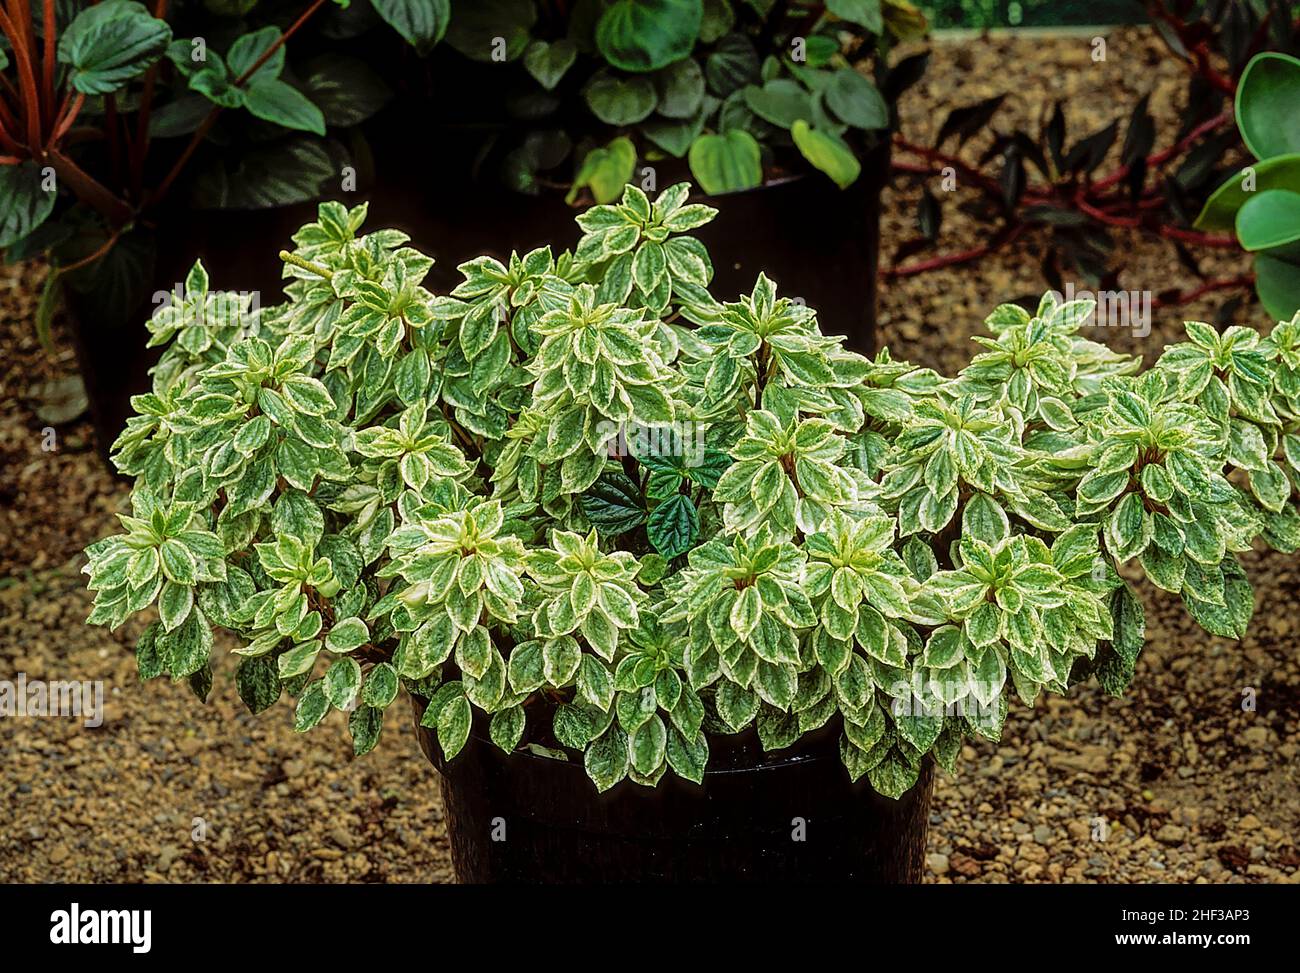 Peperomia Green Valley Variegata an evergreen compact succulent houseplant that has green leaves with white edging and is a frost tender perennial Stock Photo